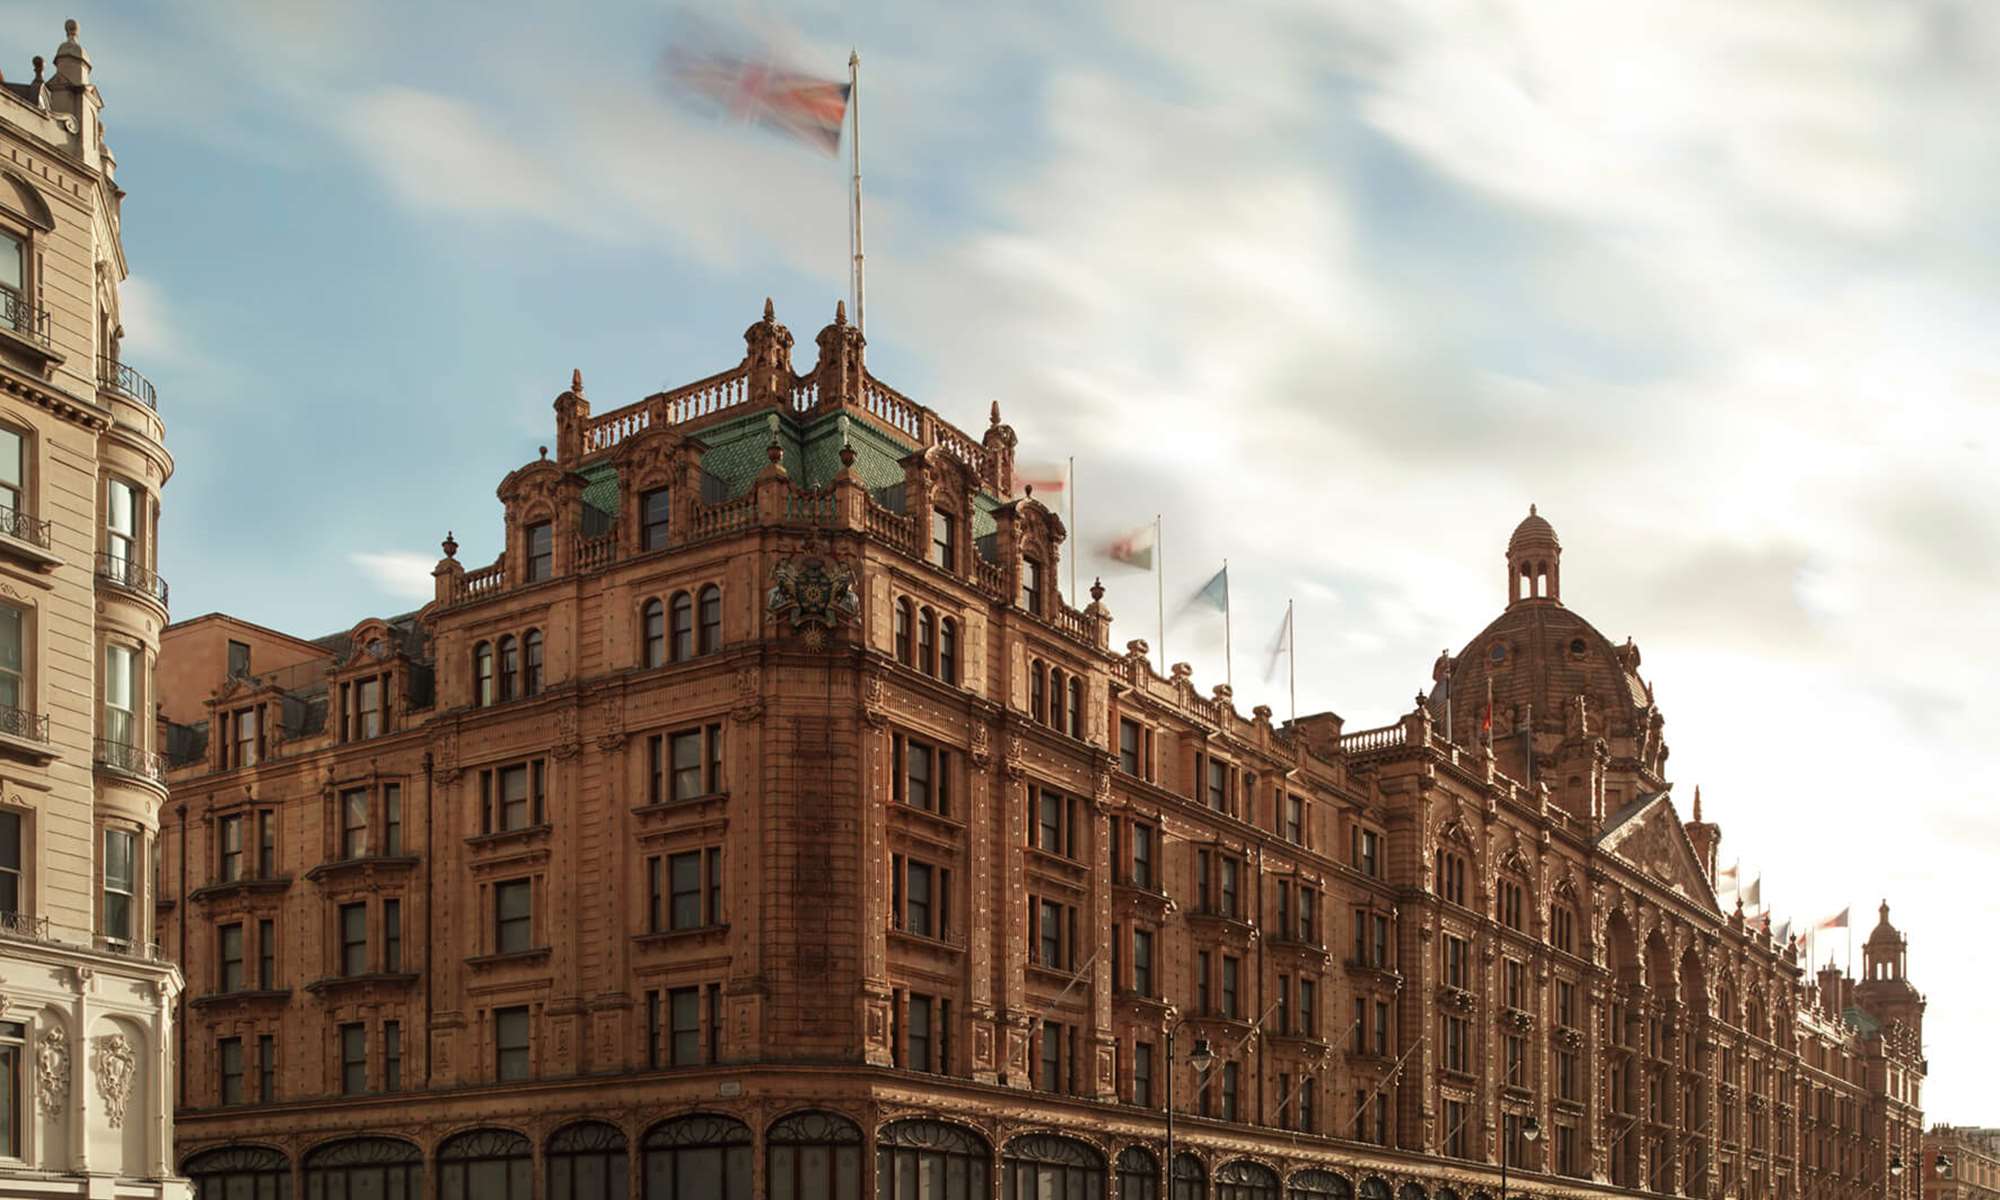 Exterior day time view of Harrods 